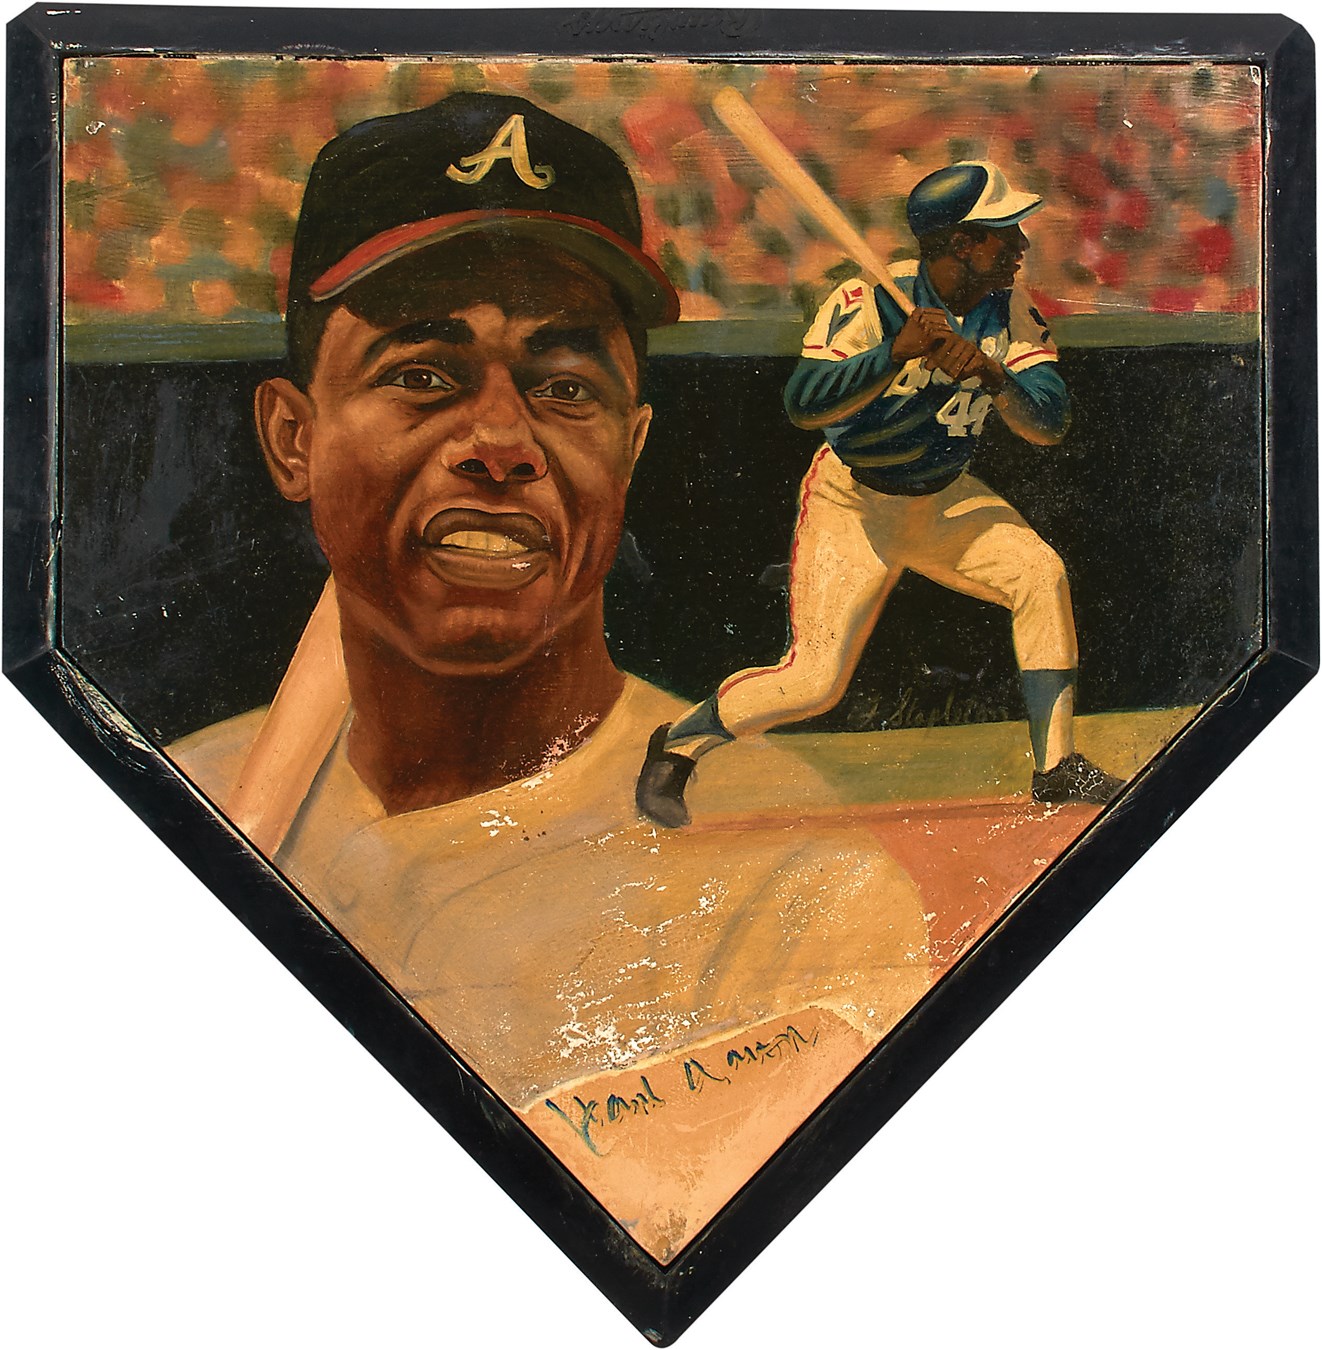 Baseball Autographs - Hank Aaron Signed Oil Painting on Home Plate by Frank Stapleton (JSA)